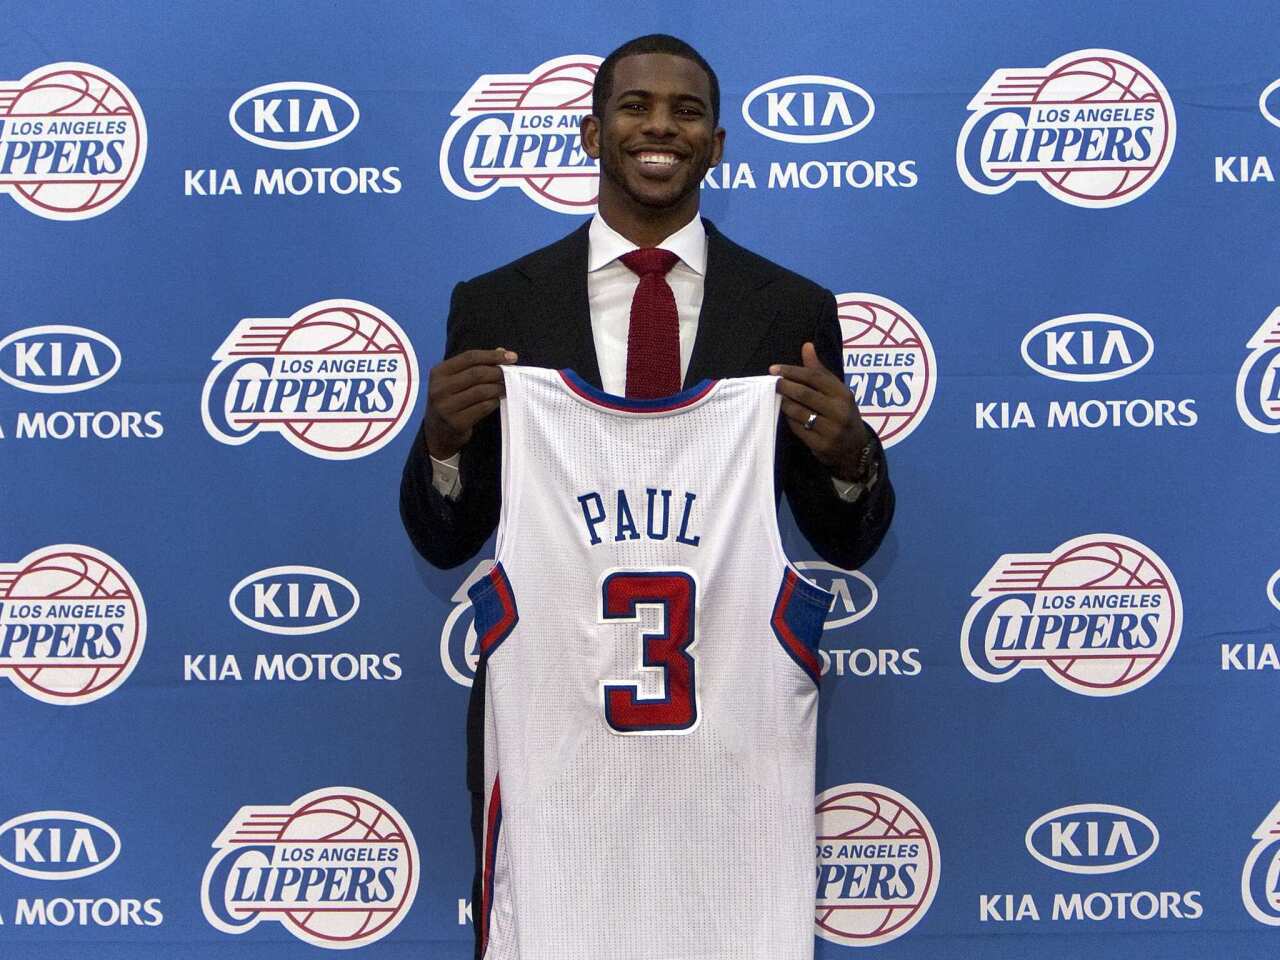 Clippers point guard Chris Paul poses with his new team jersey during a team news conference on Thursday.